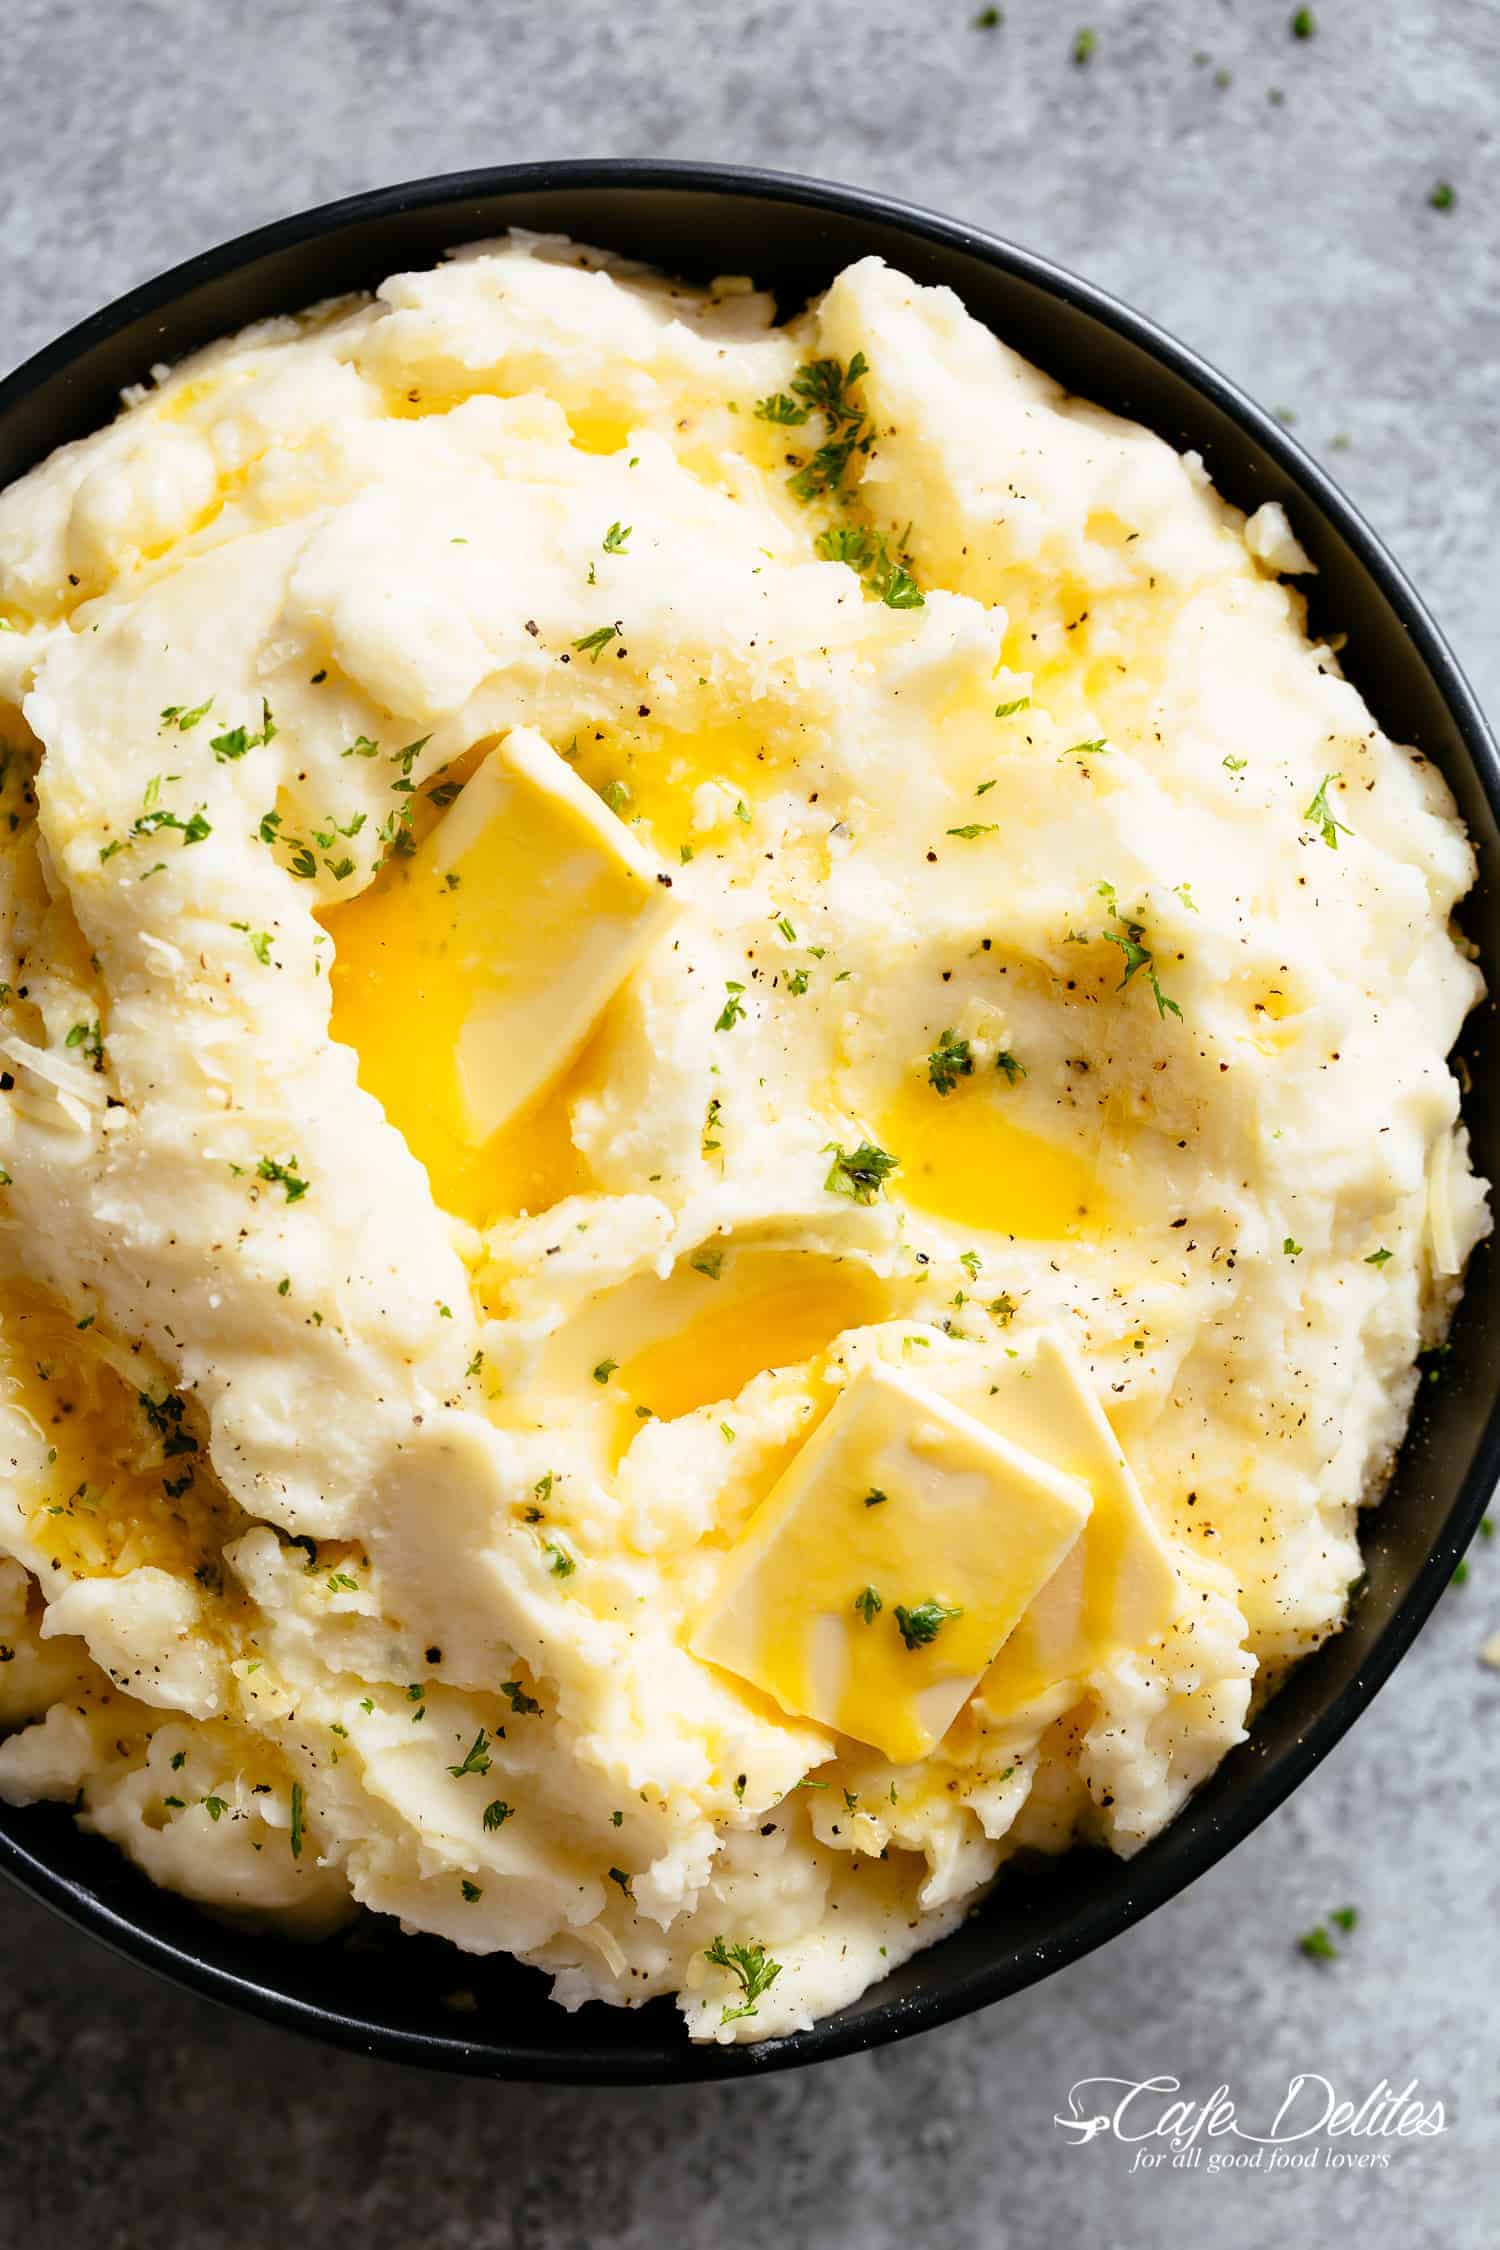 Image result for mashed potatoes